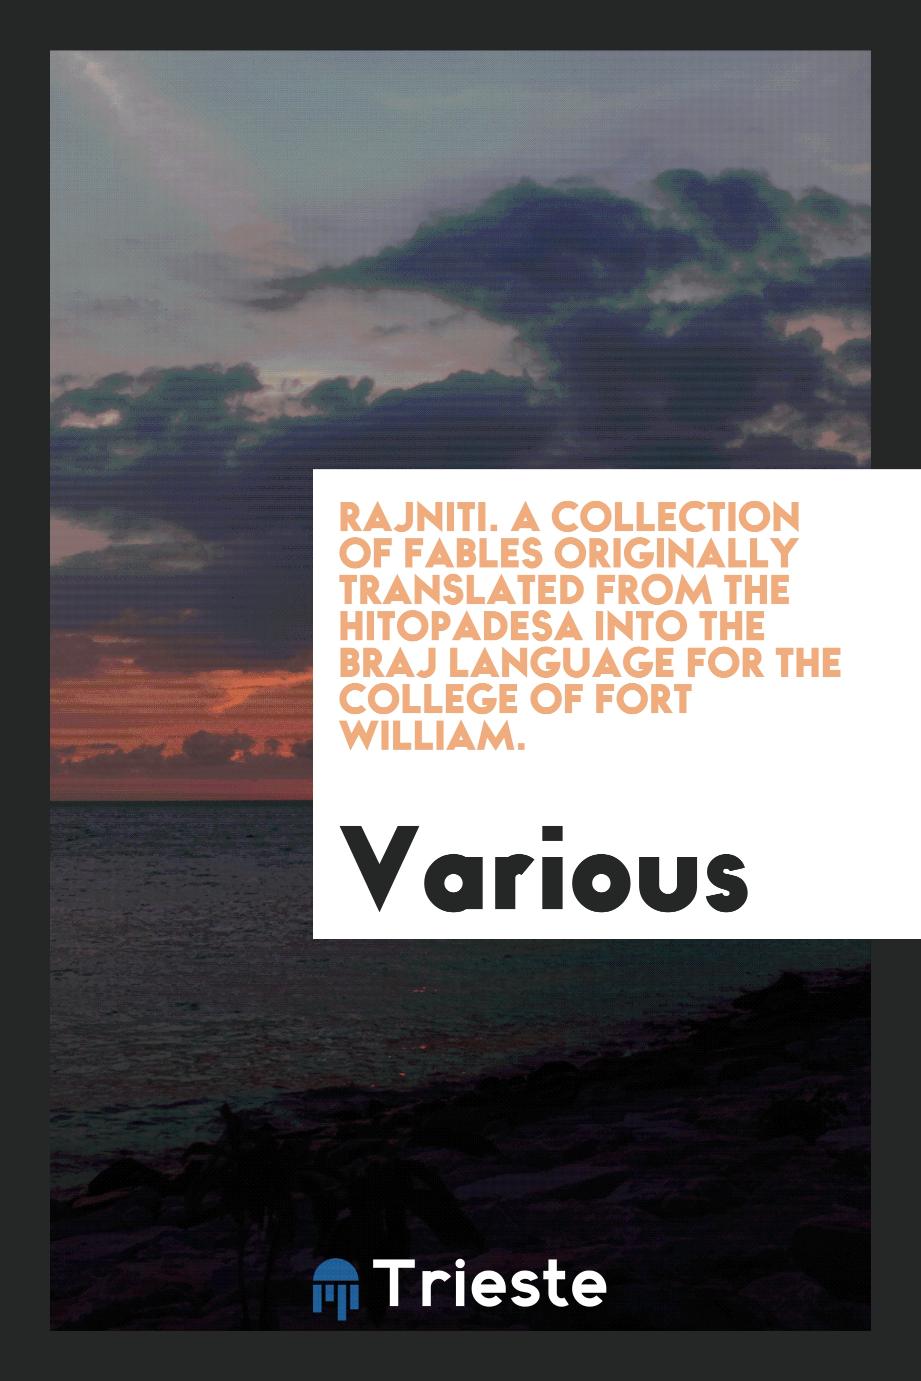 Rajniti. A collection of fables originally translated from the Hitopadesa into the Braj language for the college of Fort William.